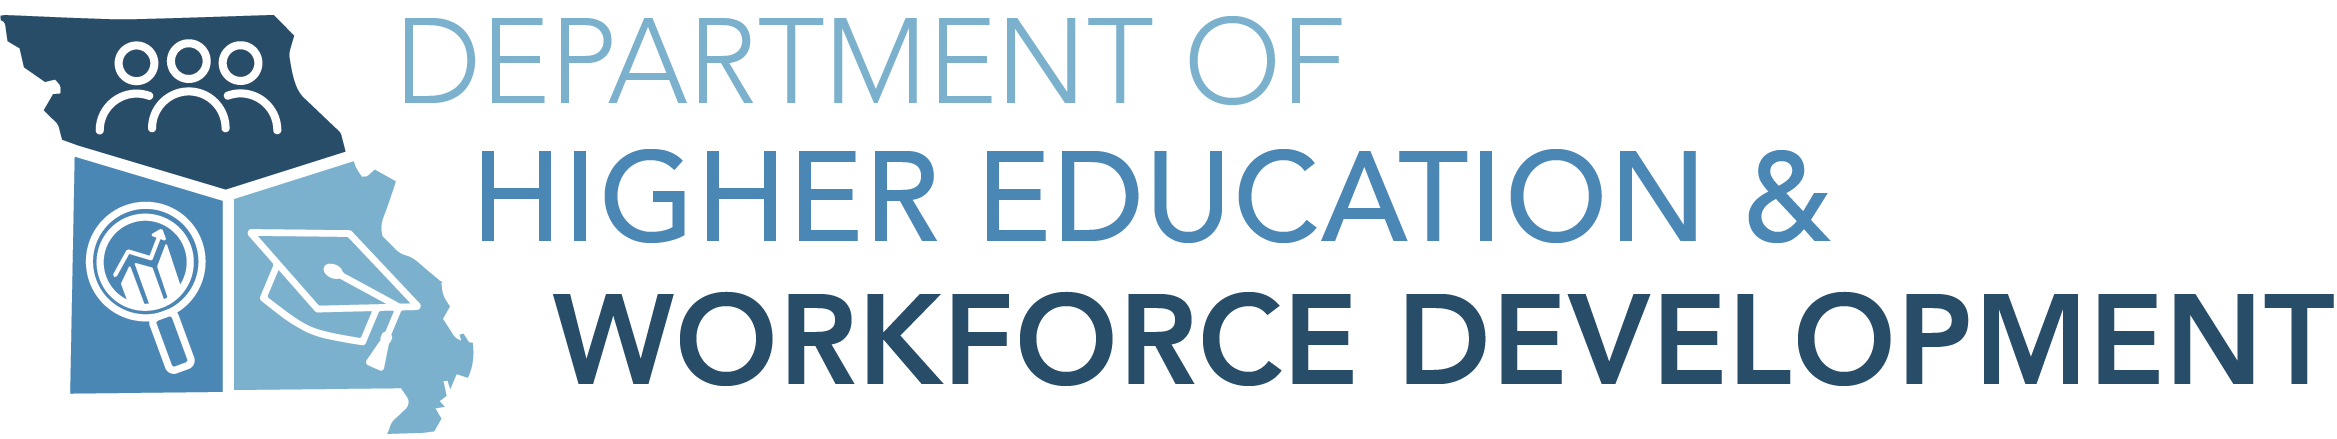 Department of Higher Education And Workforce Development